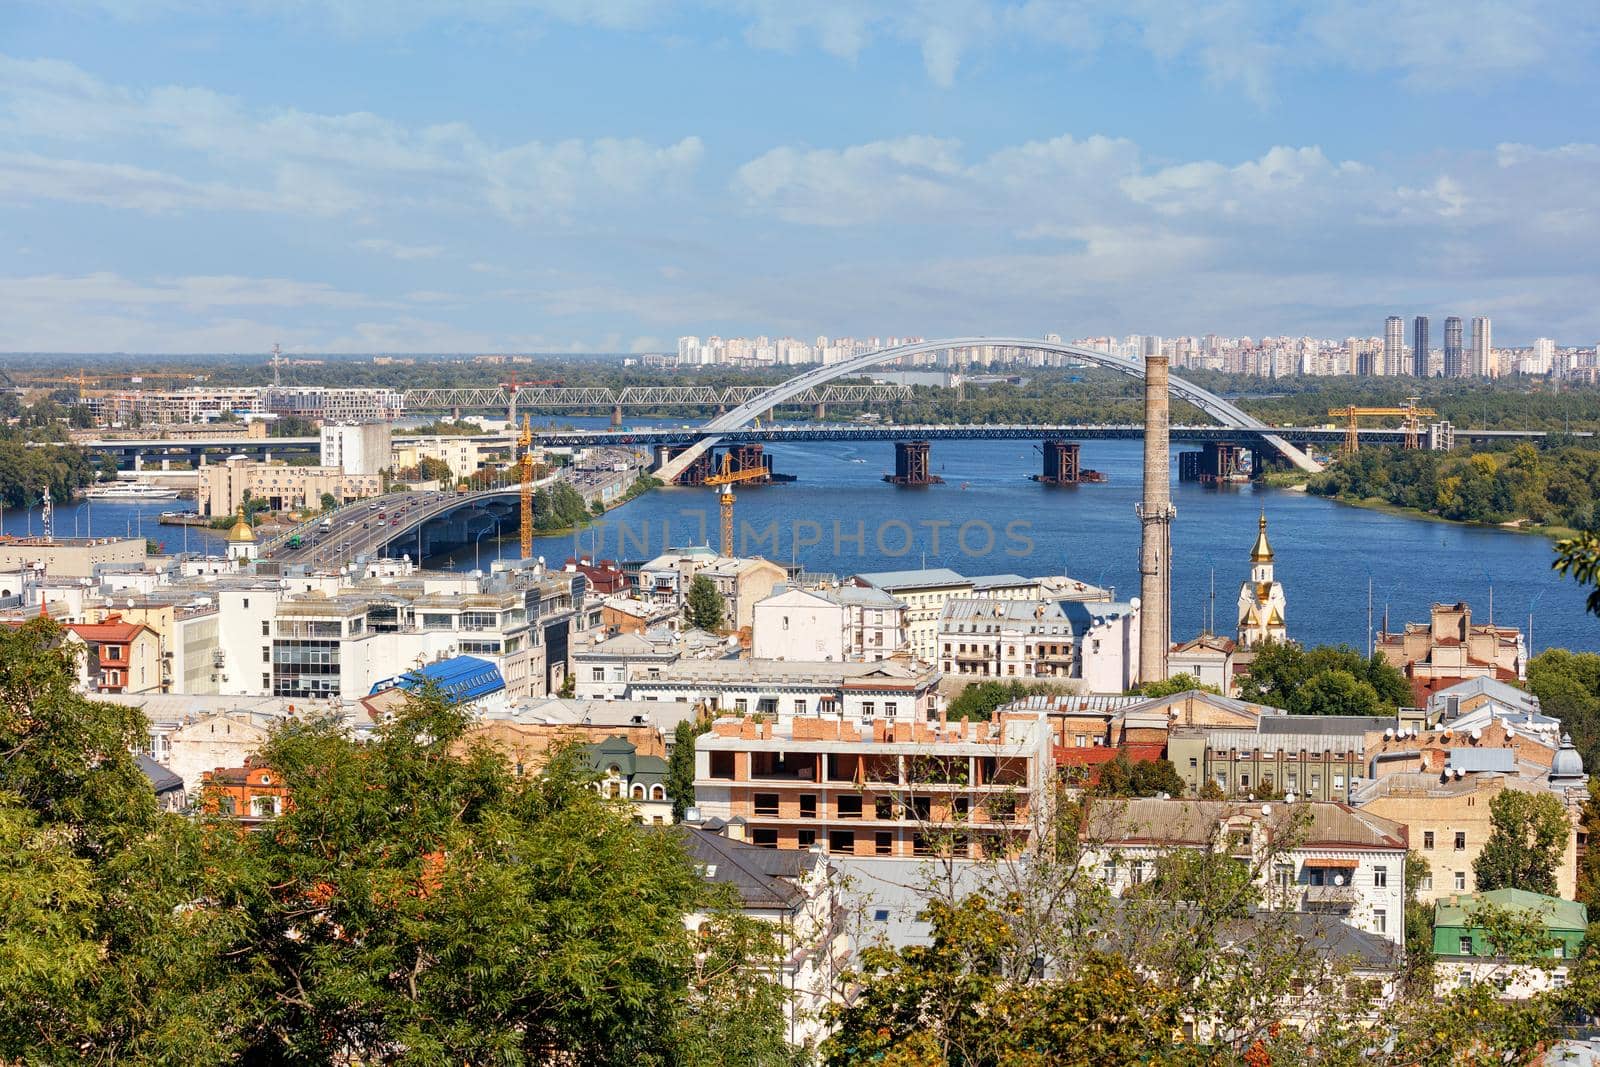 A view of the old Podil district of summer Kyiv, automobile and railway bridges, a bell tower with a gilded dome, the Dnipro River and many old and new city buildings.